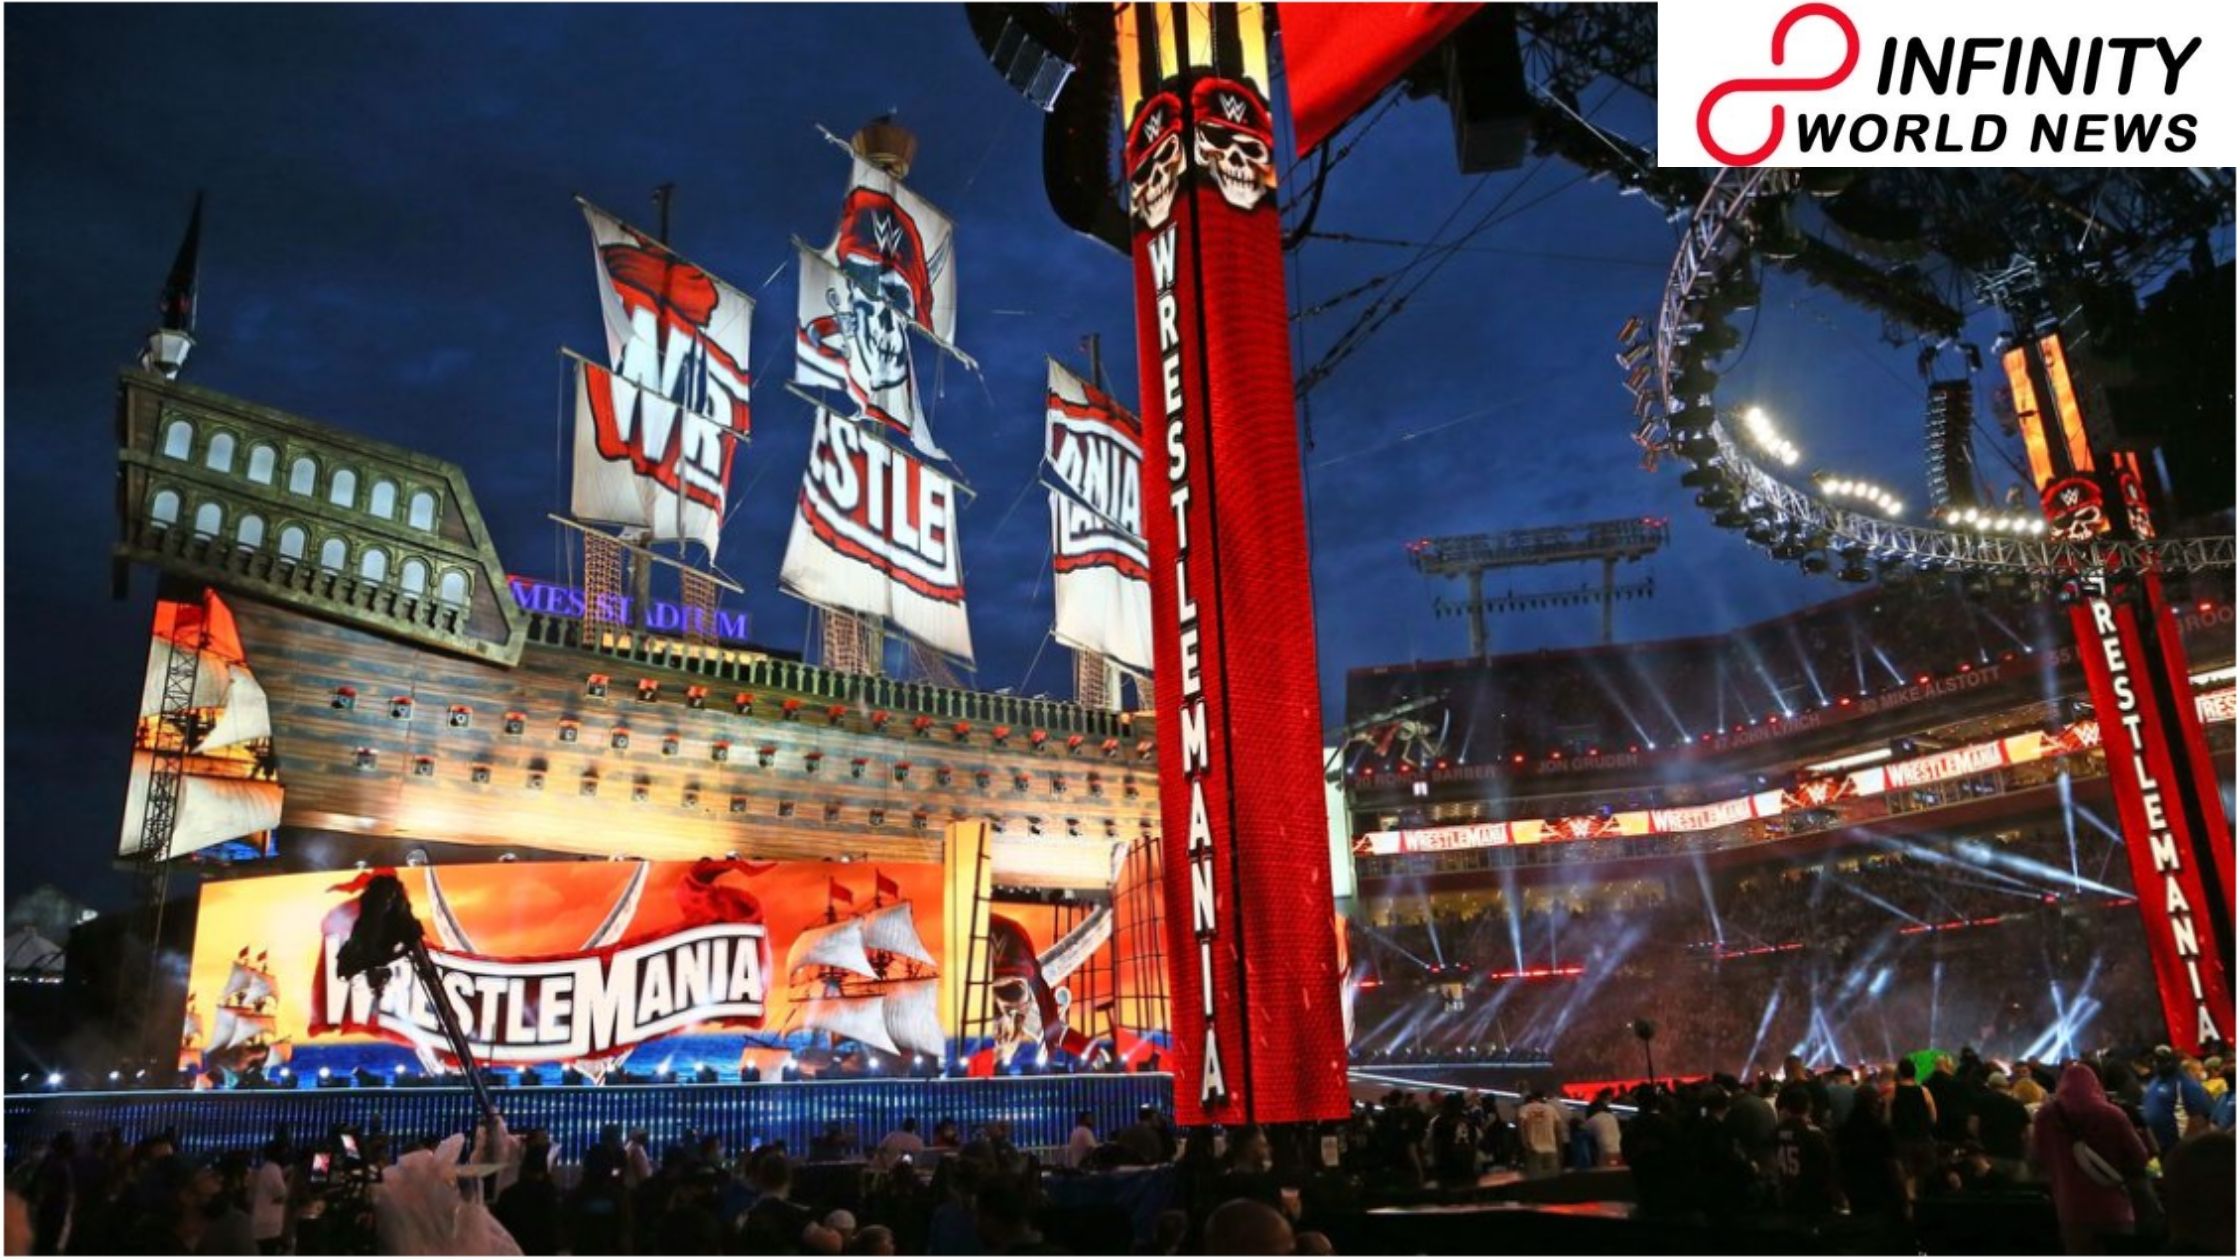 37 perceptions on going to WrestleMania 37 in Tampa